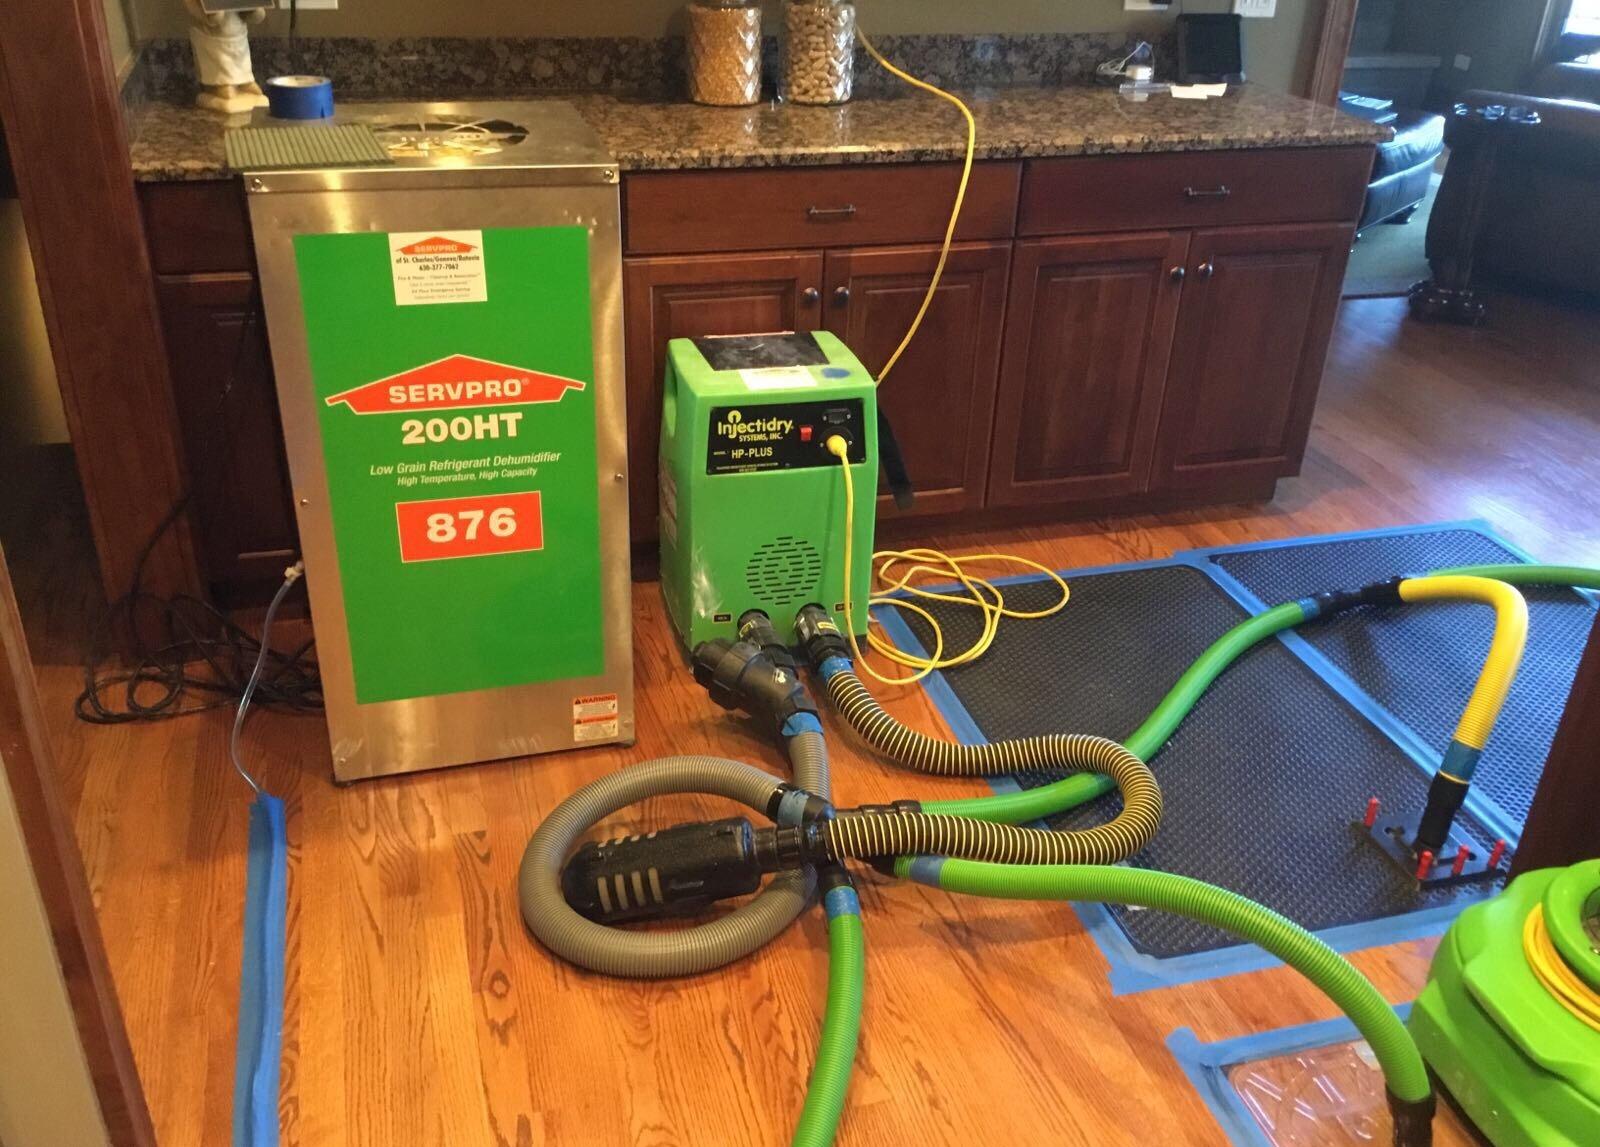 The floor mat system is in place to save the hardwood floors from water damage.